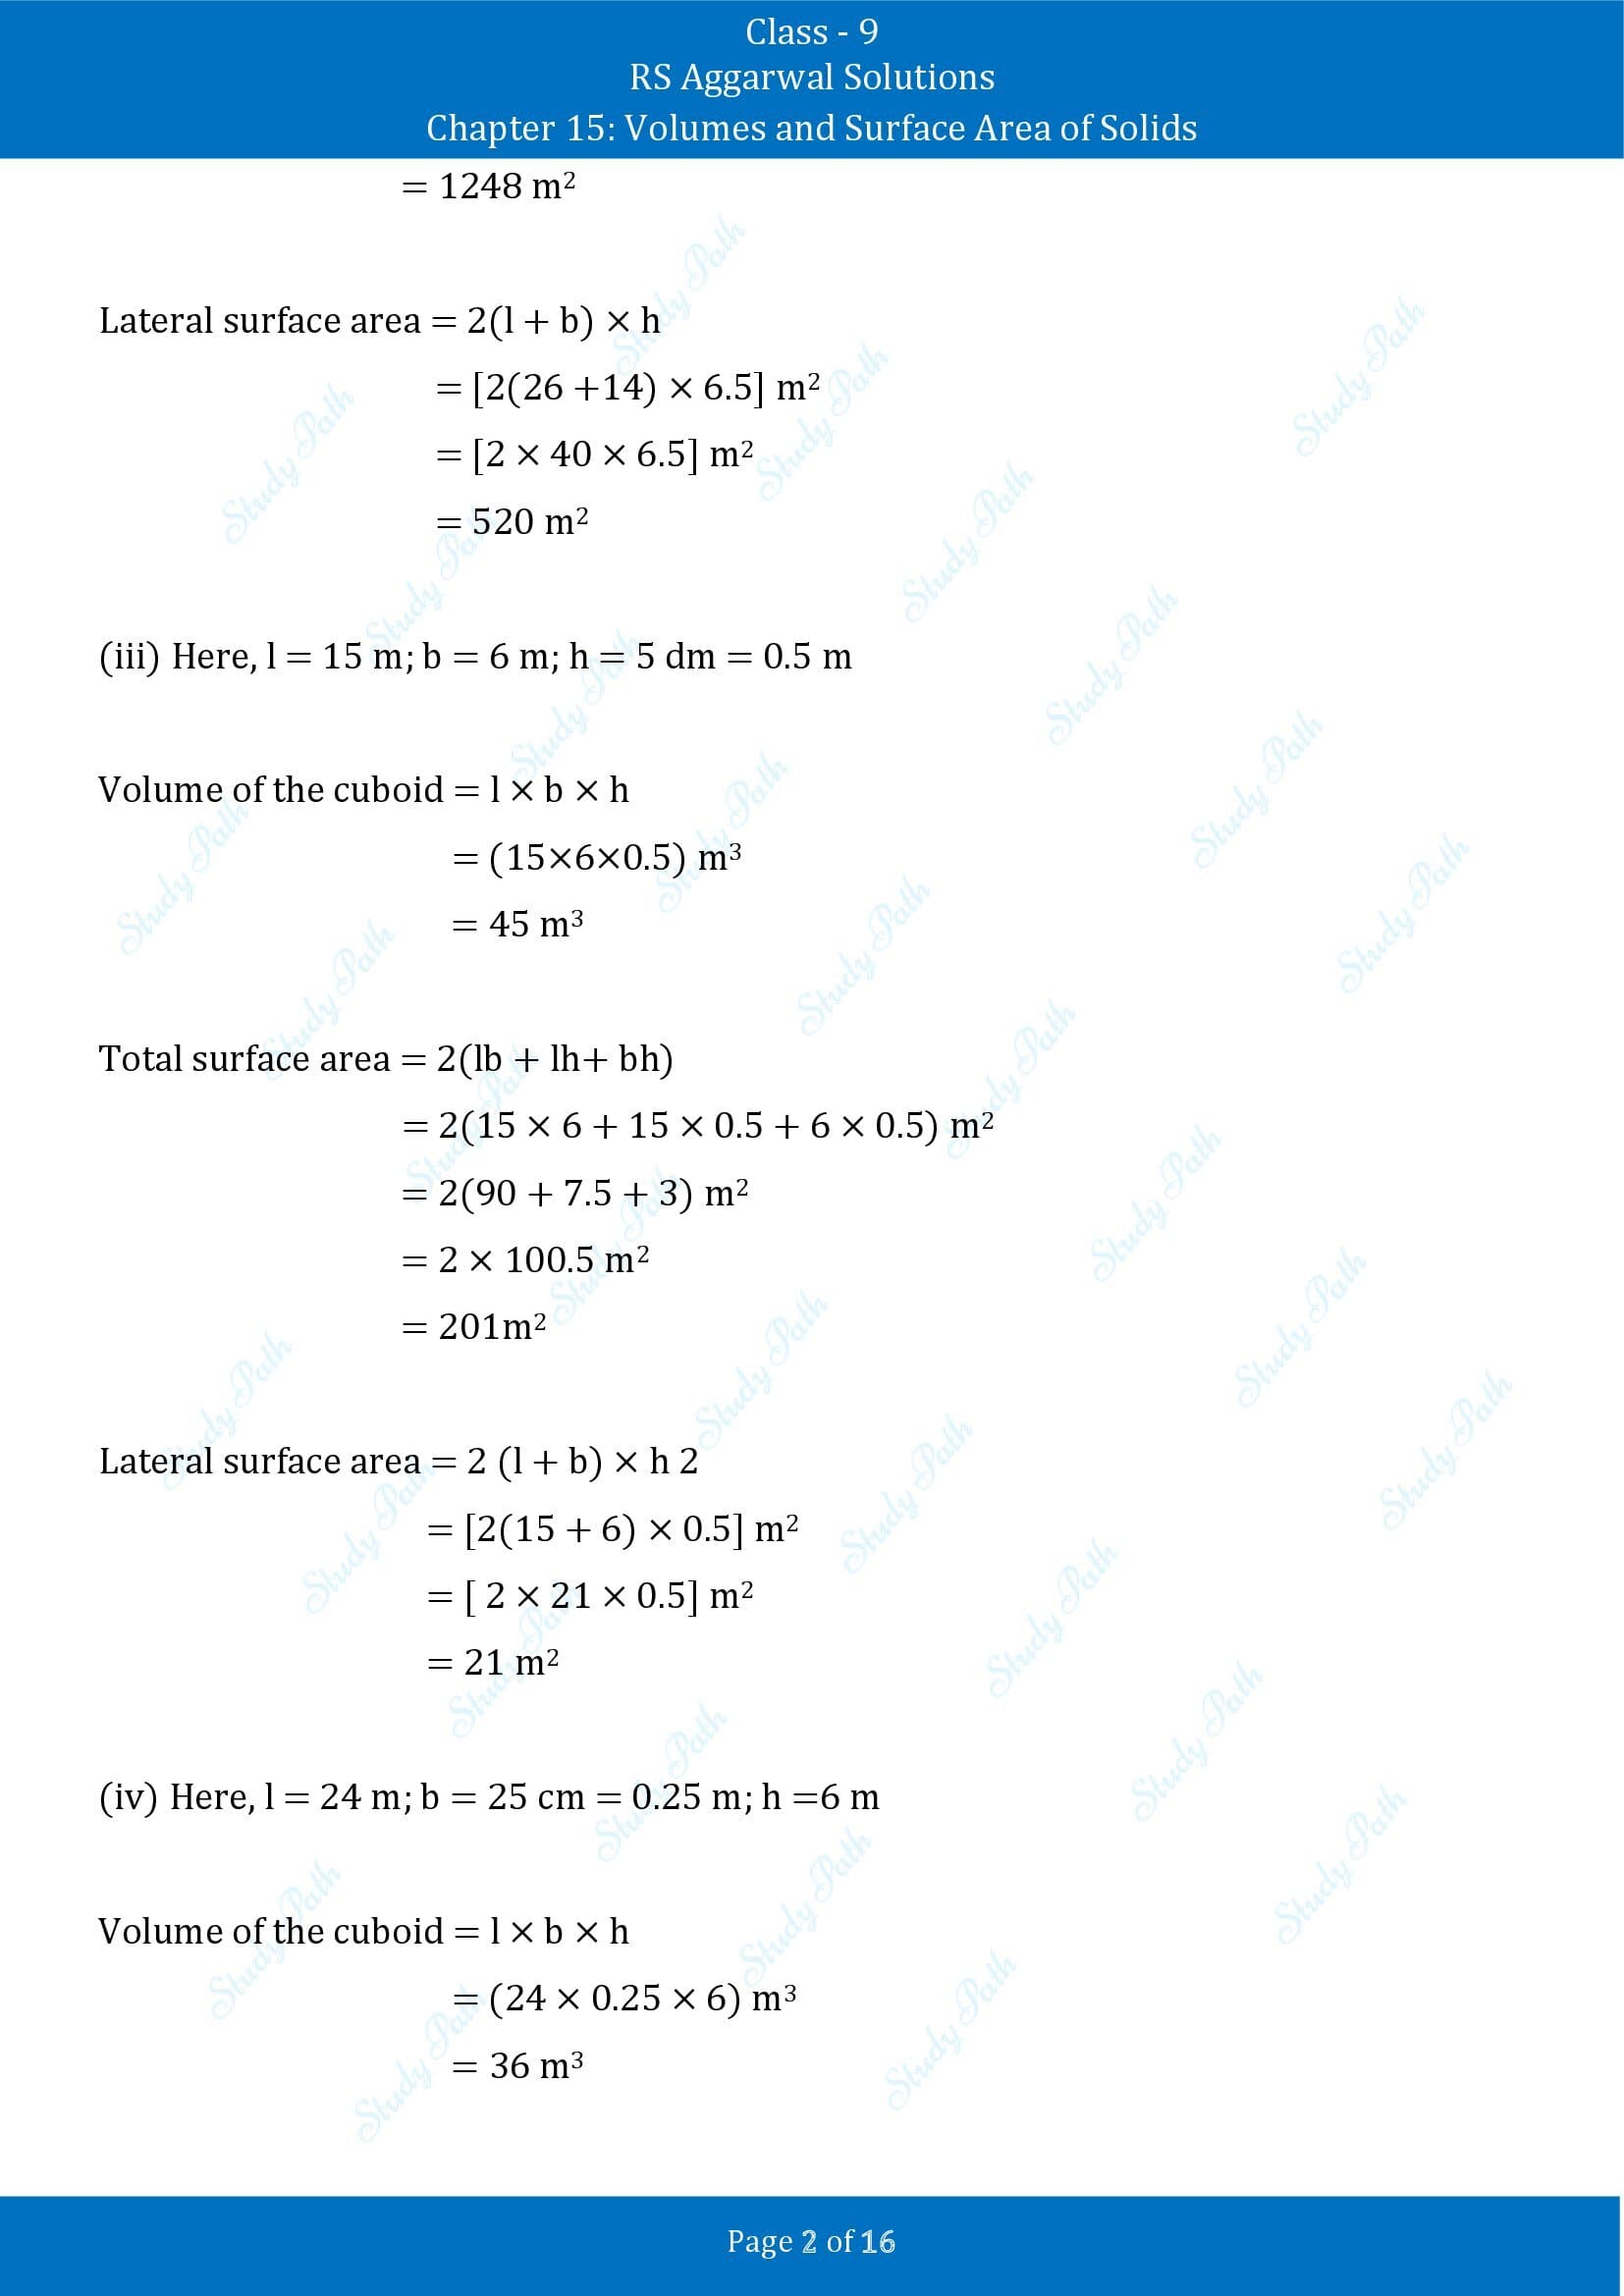 RS Aggarwal Solutions Class 9 Chapter 15 Volumes and Surface Area of Solids Exercise 15A 00002